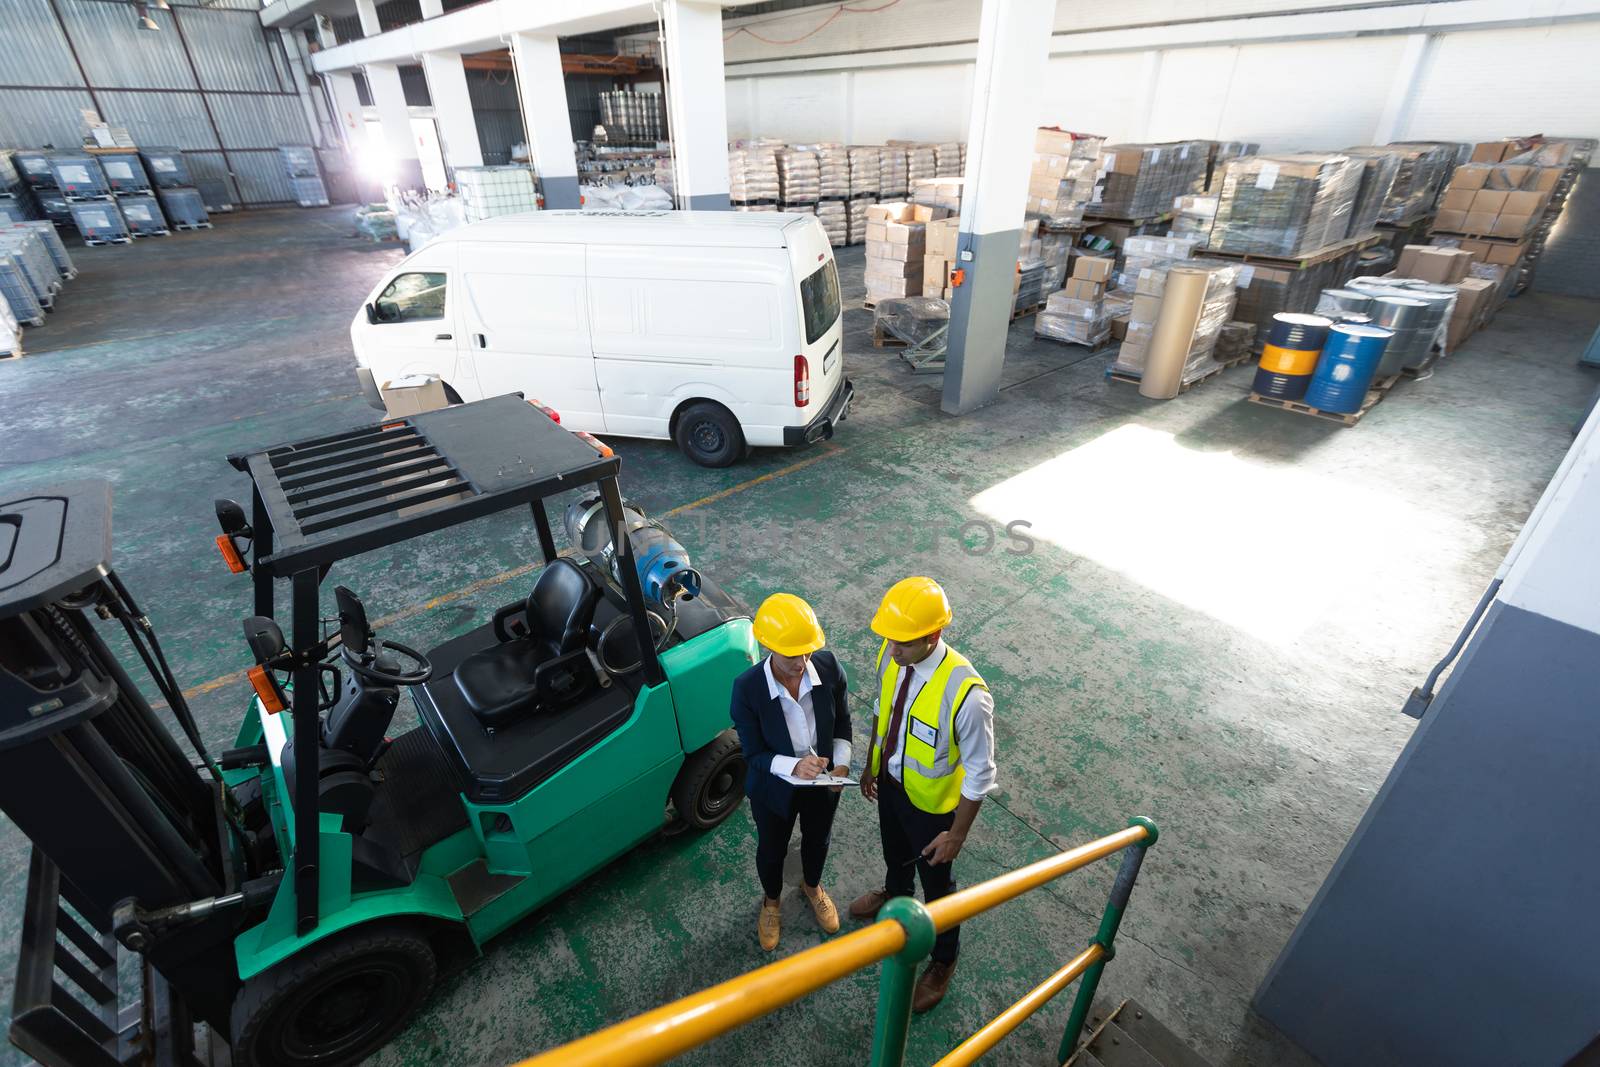 High angle view of Caucasian female manager and male supervisor discussing over clipboard in warehouse. This is a freight transportation and distribution warehouse. Industrial and industrial workers concept